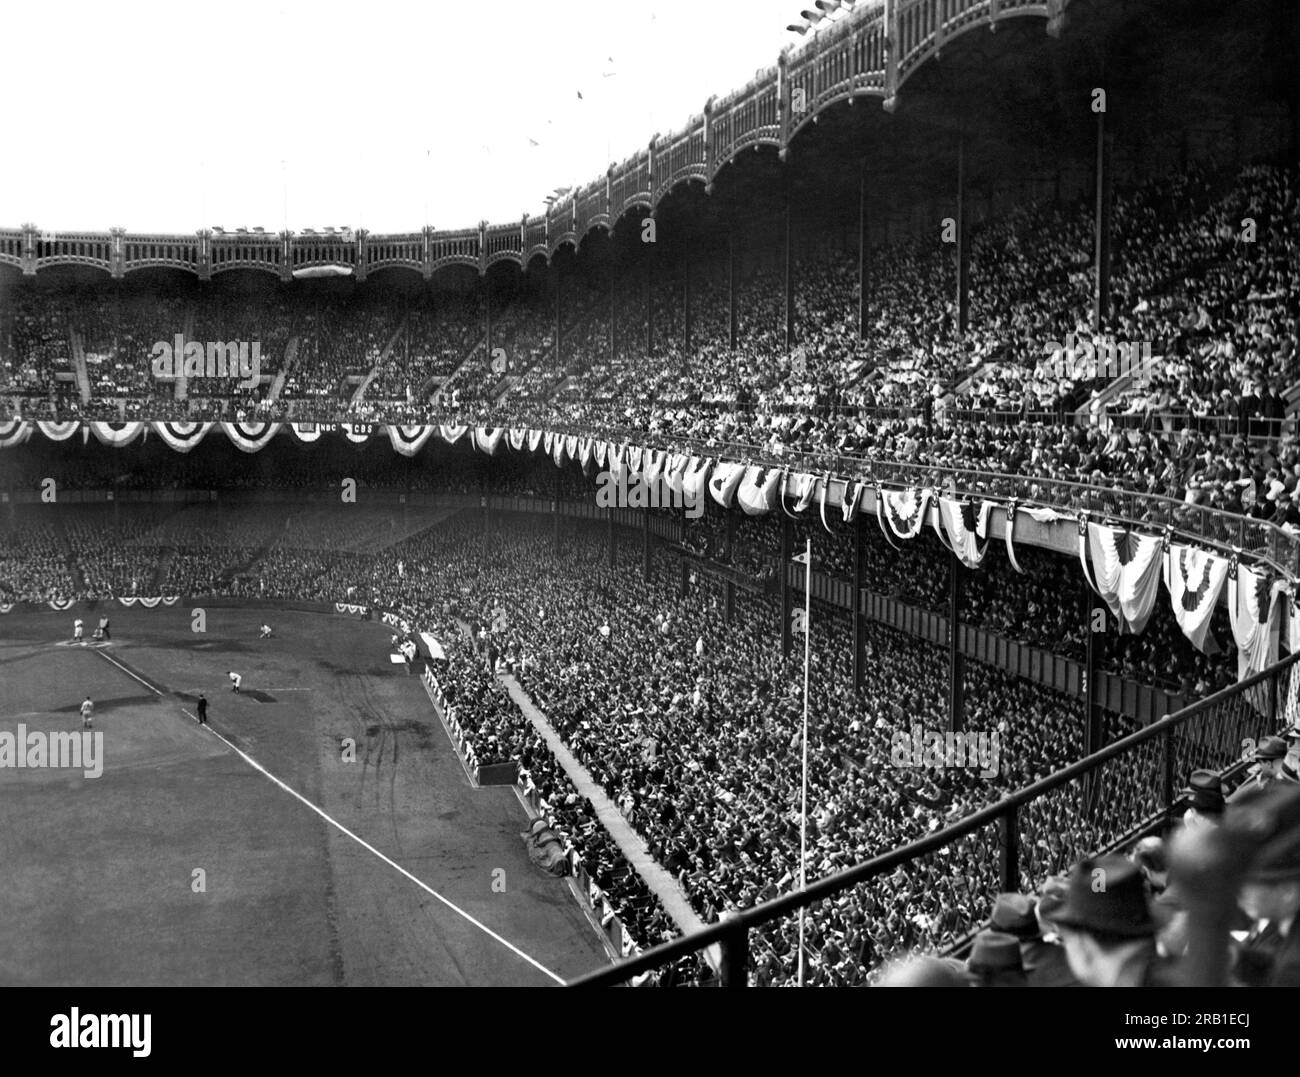 New York, New York:   October 6, 1937. Thousands of fans watched the New York Yankees defeat the New York Giants in the first game of the 1937 World Series at Yankee Stadium. Stock Photo